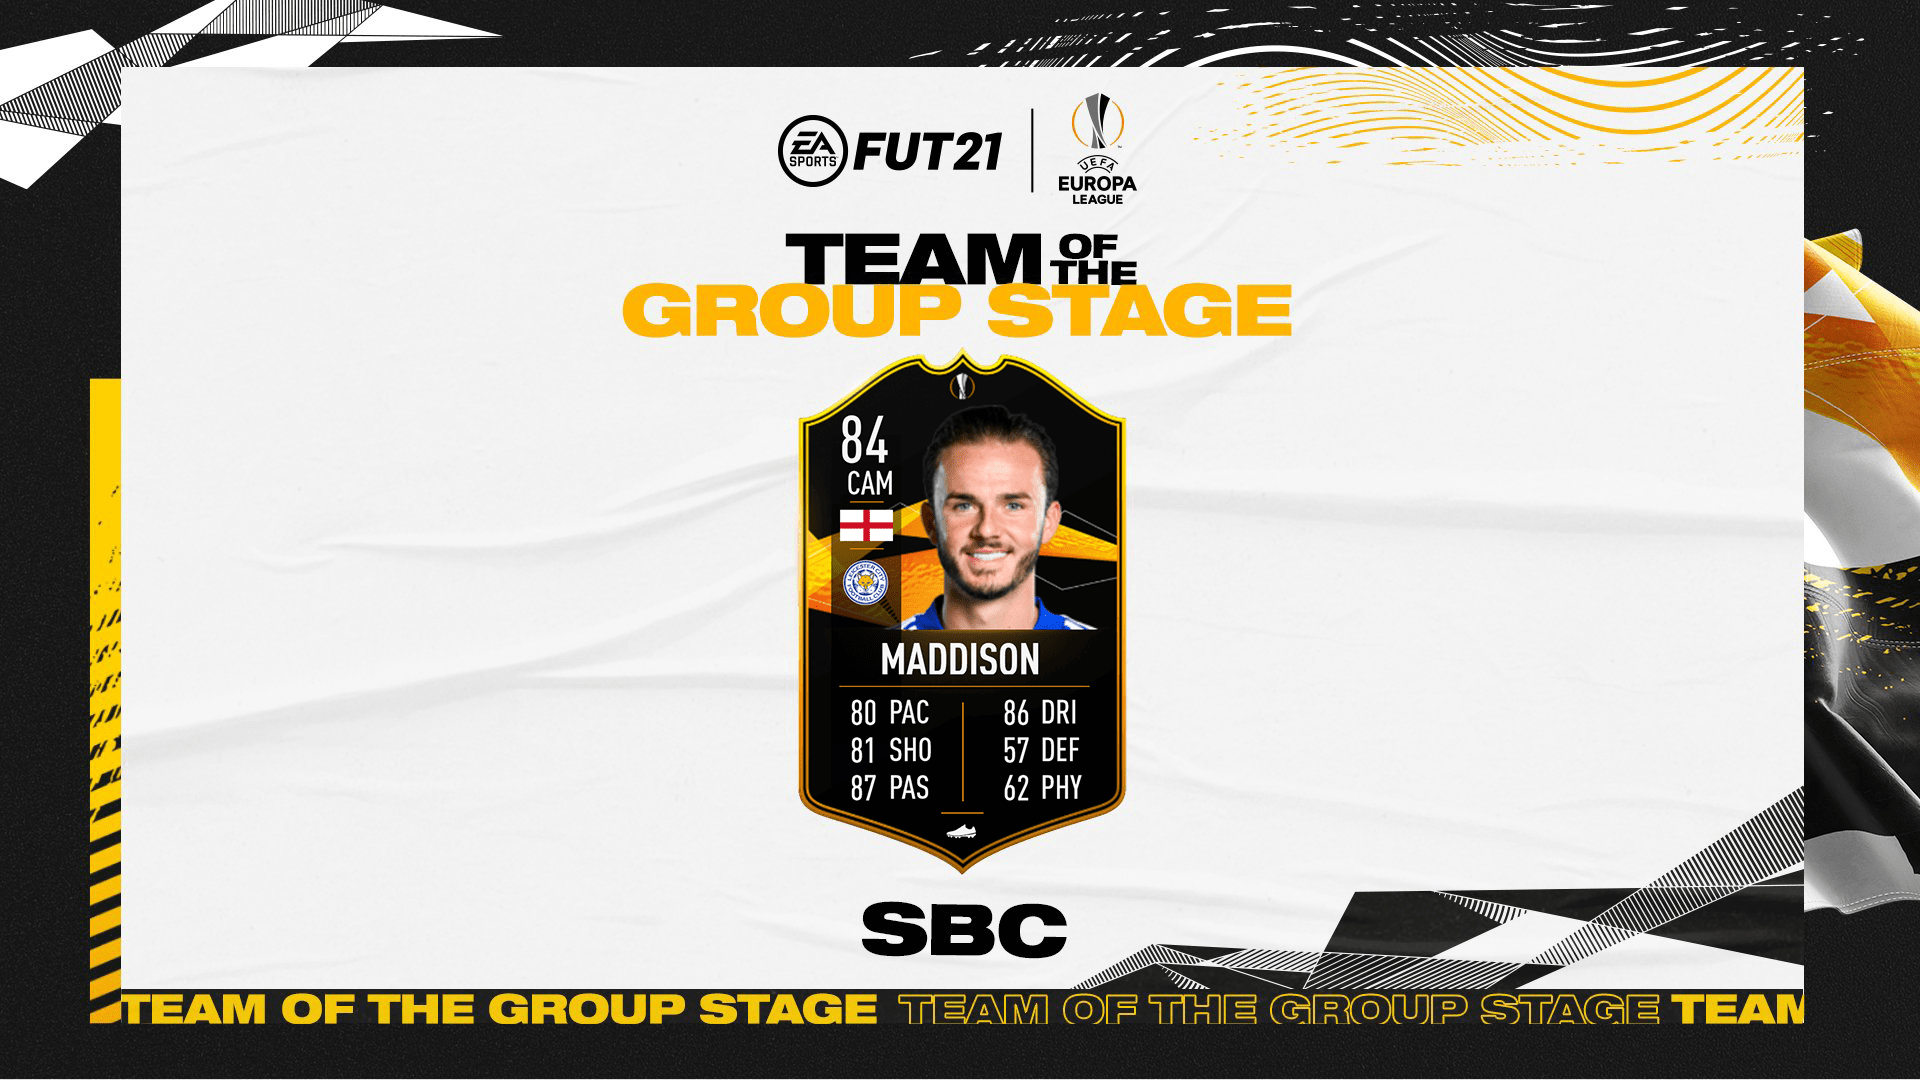 Fifa 21 James Maddison Totgs Sbc Announced Requirements And Solutions Fifaultimateteam It Uk